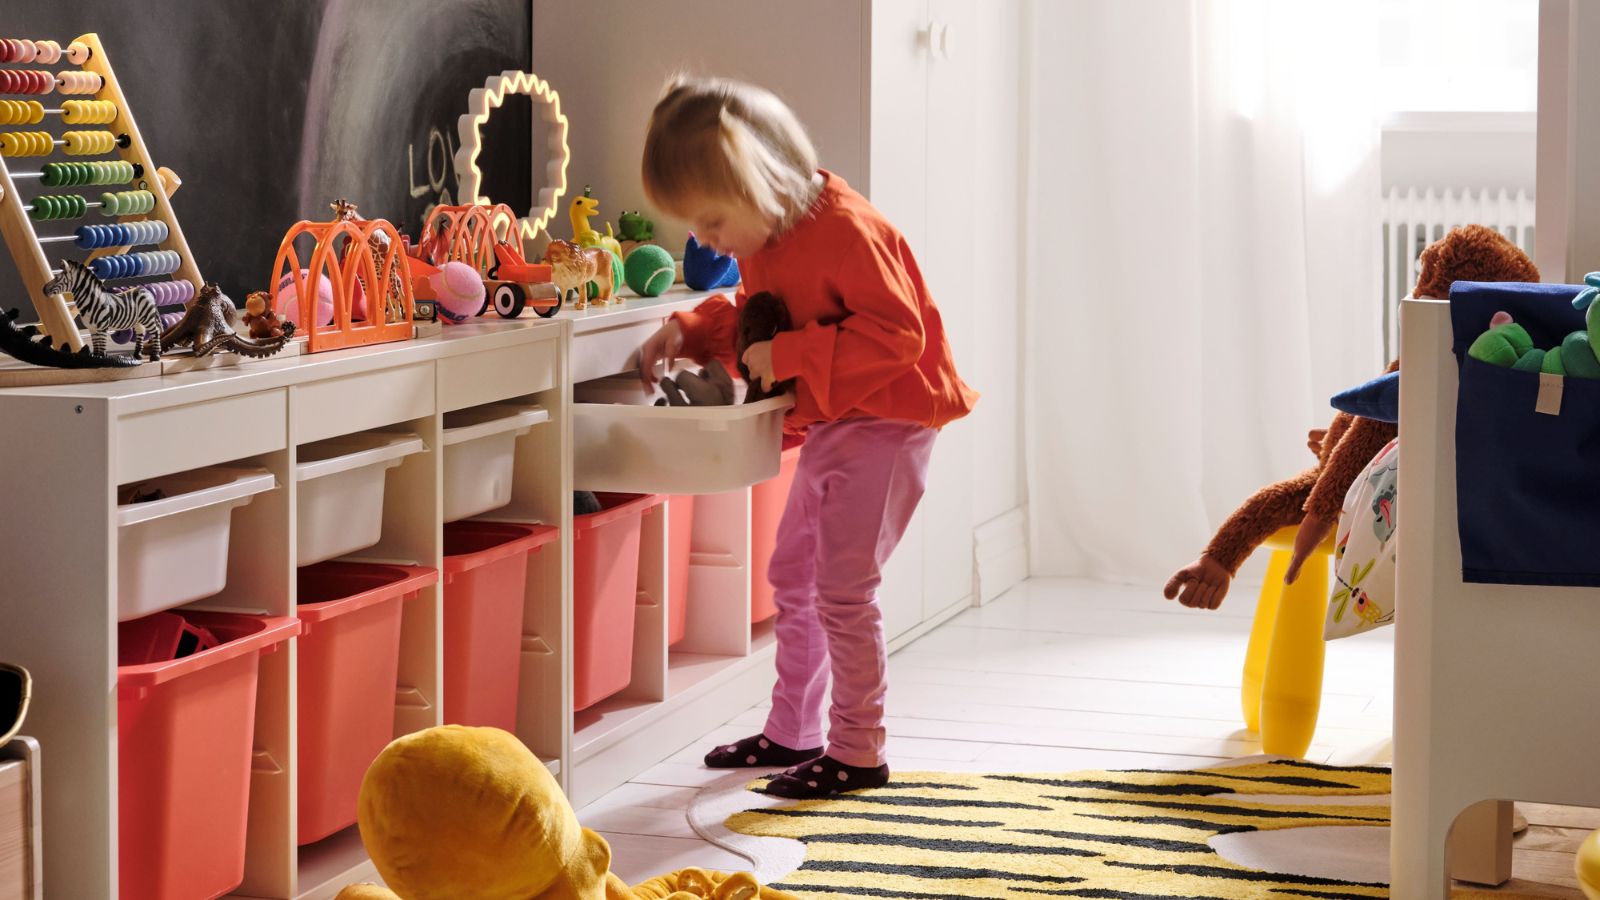 10 Storage Bench Ideas for Kids’ Rooms缩略图